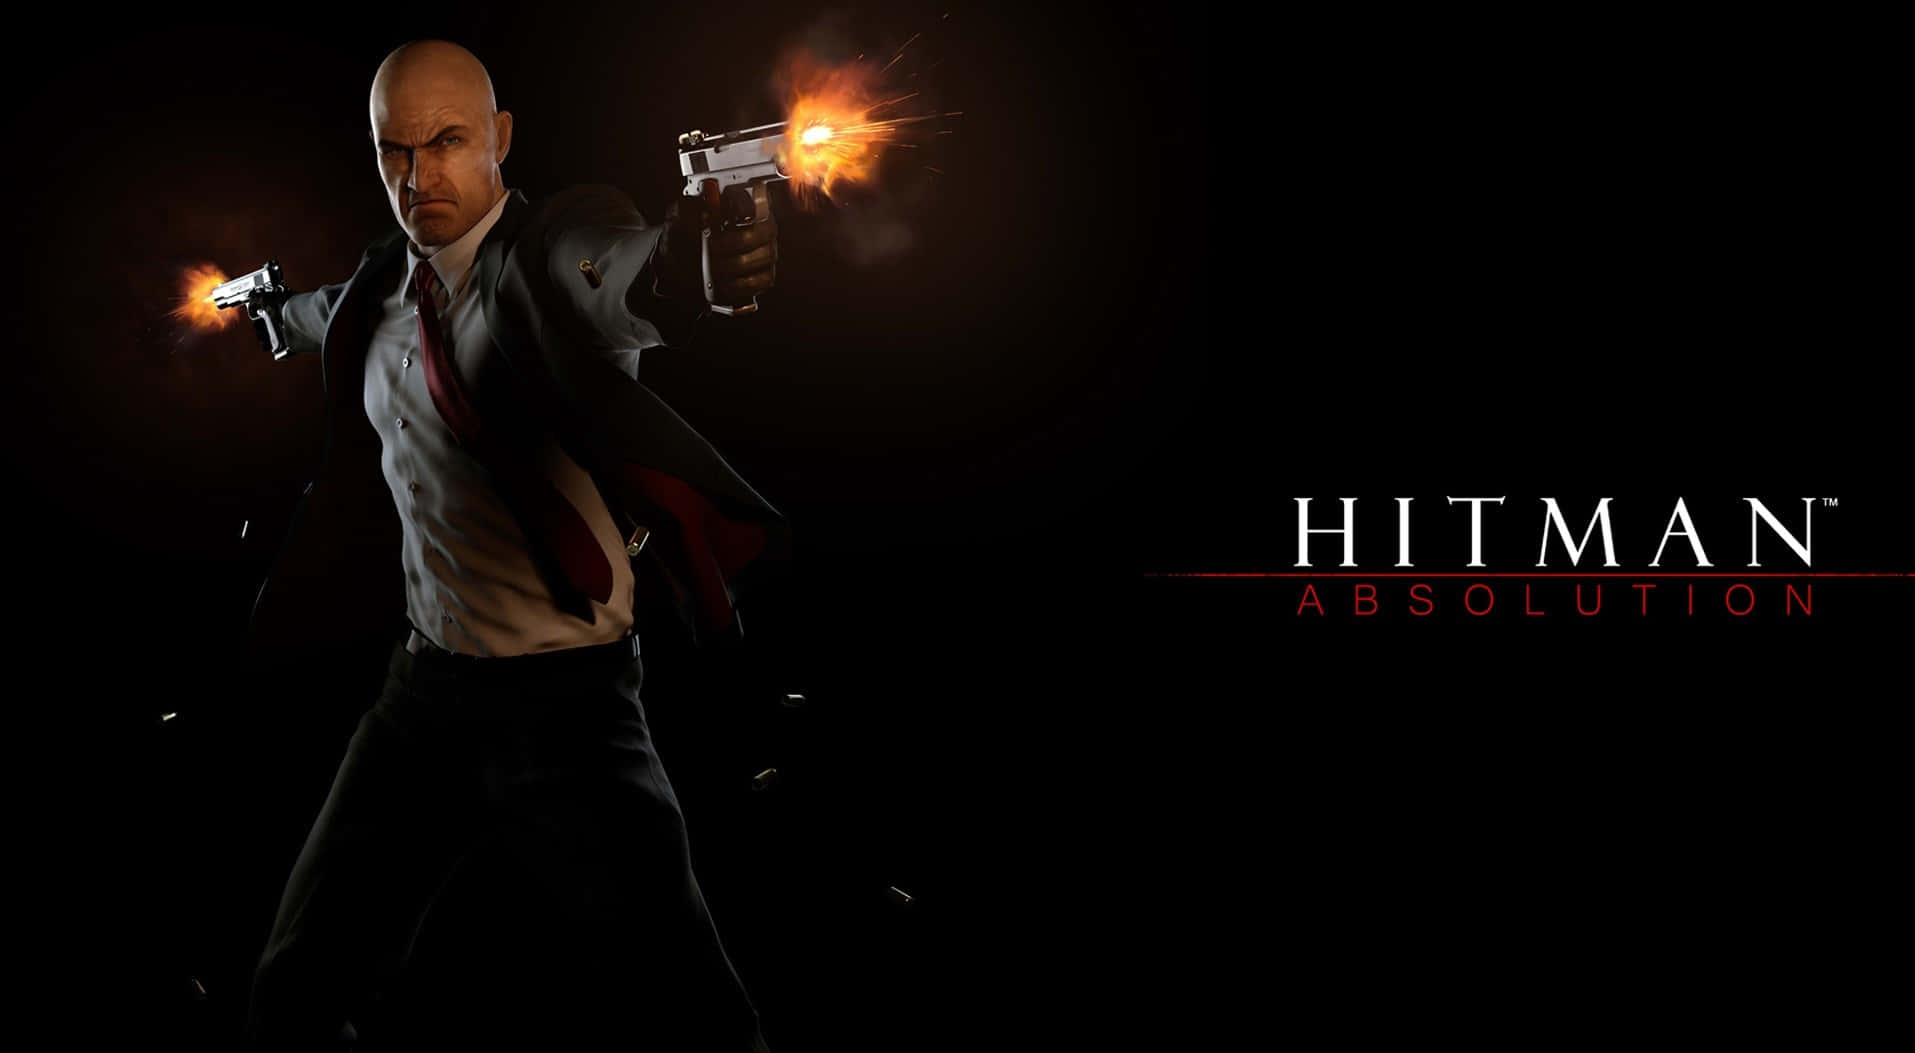 Agent 47 Returns in Hitman Absolution